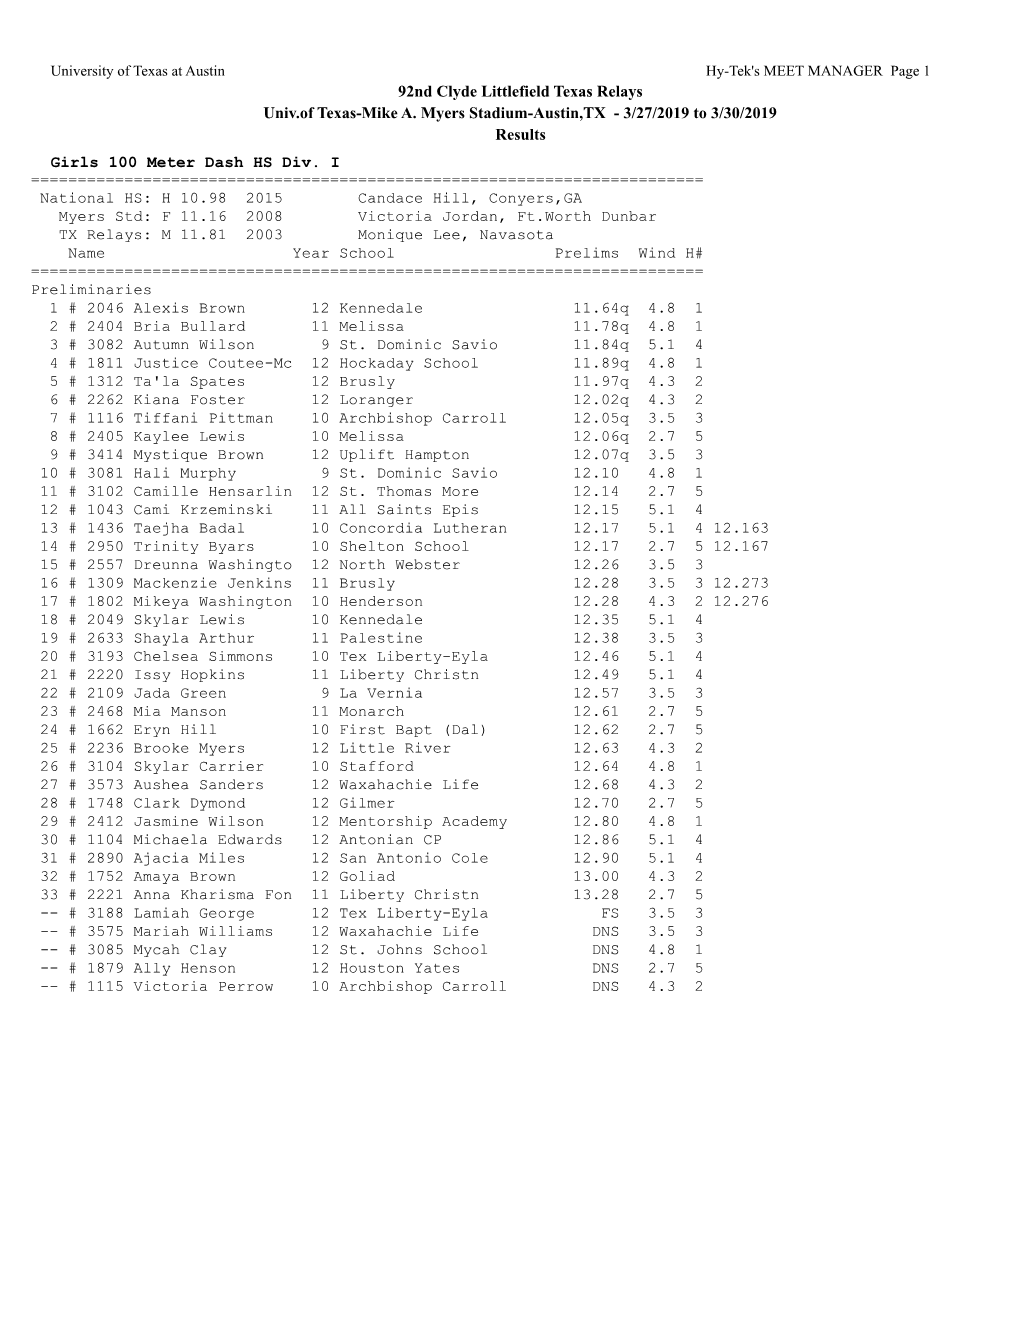 92Nd Clyde Littlefield Texas Relays Univ.Of Texas-Mike A. Myers Stadium-Austin,TX - 3/27/2019 to 3/30/2019 Results Girls 100 Meter Dash HS Div